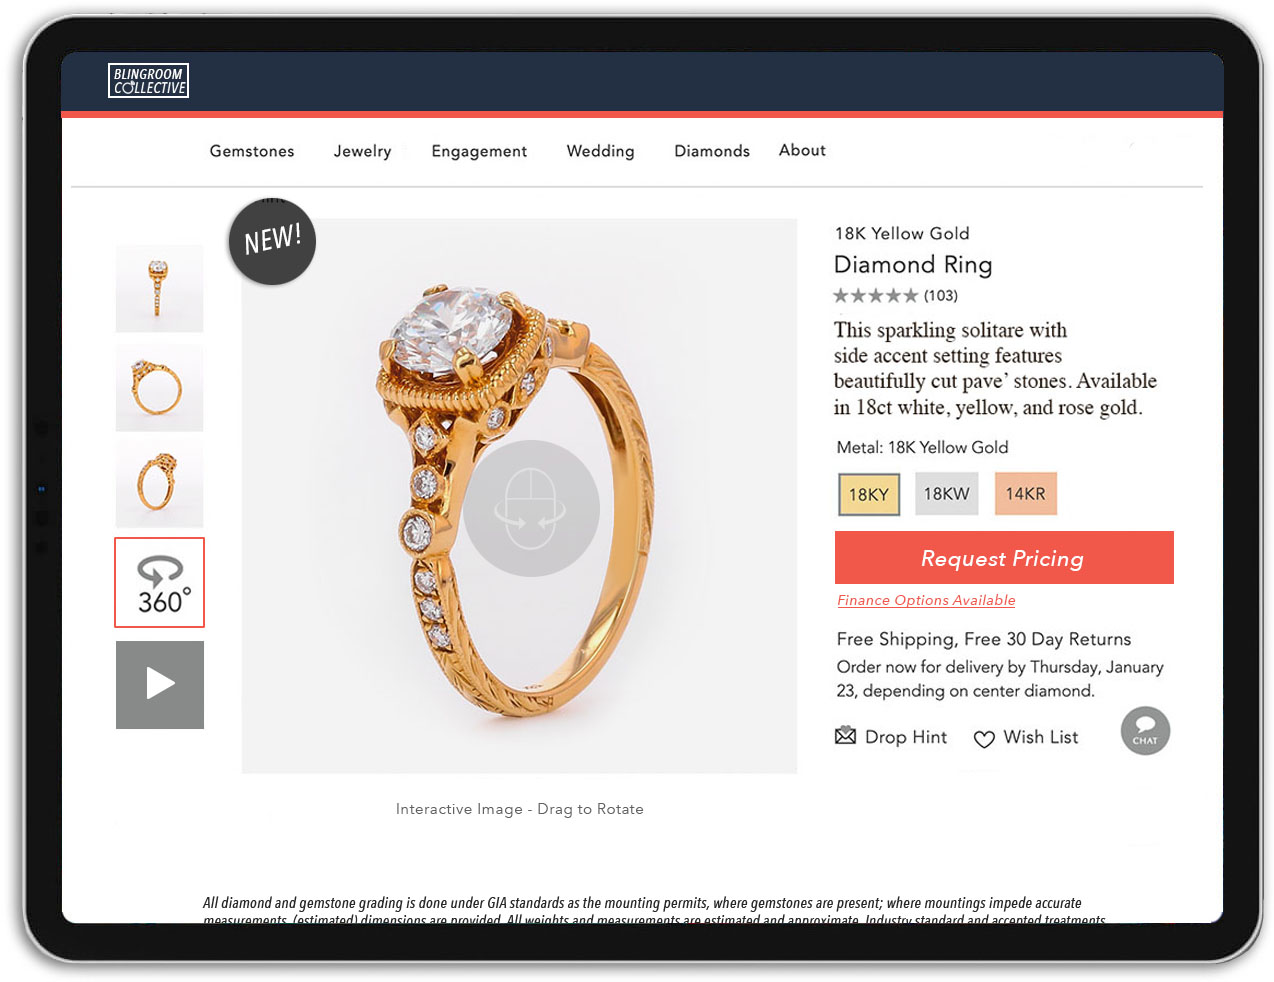 ortery-ecommerce-jewelry-photography-photography-system-ipad-mobile-mockup-standing-ring-360-mockup